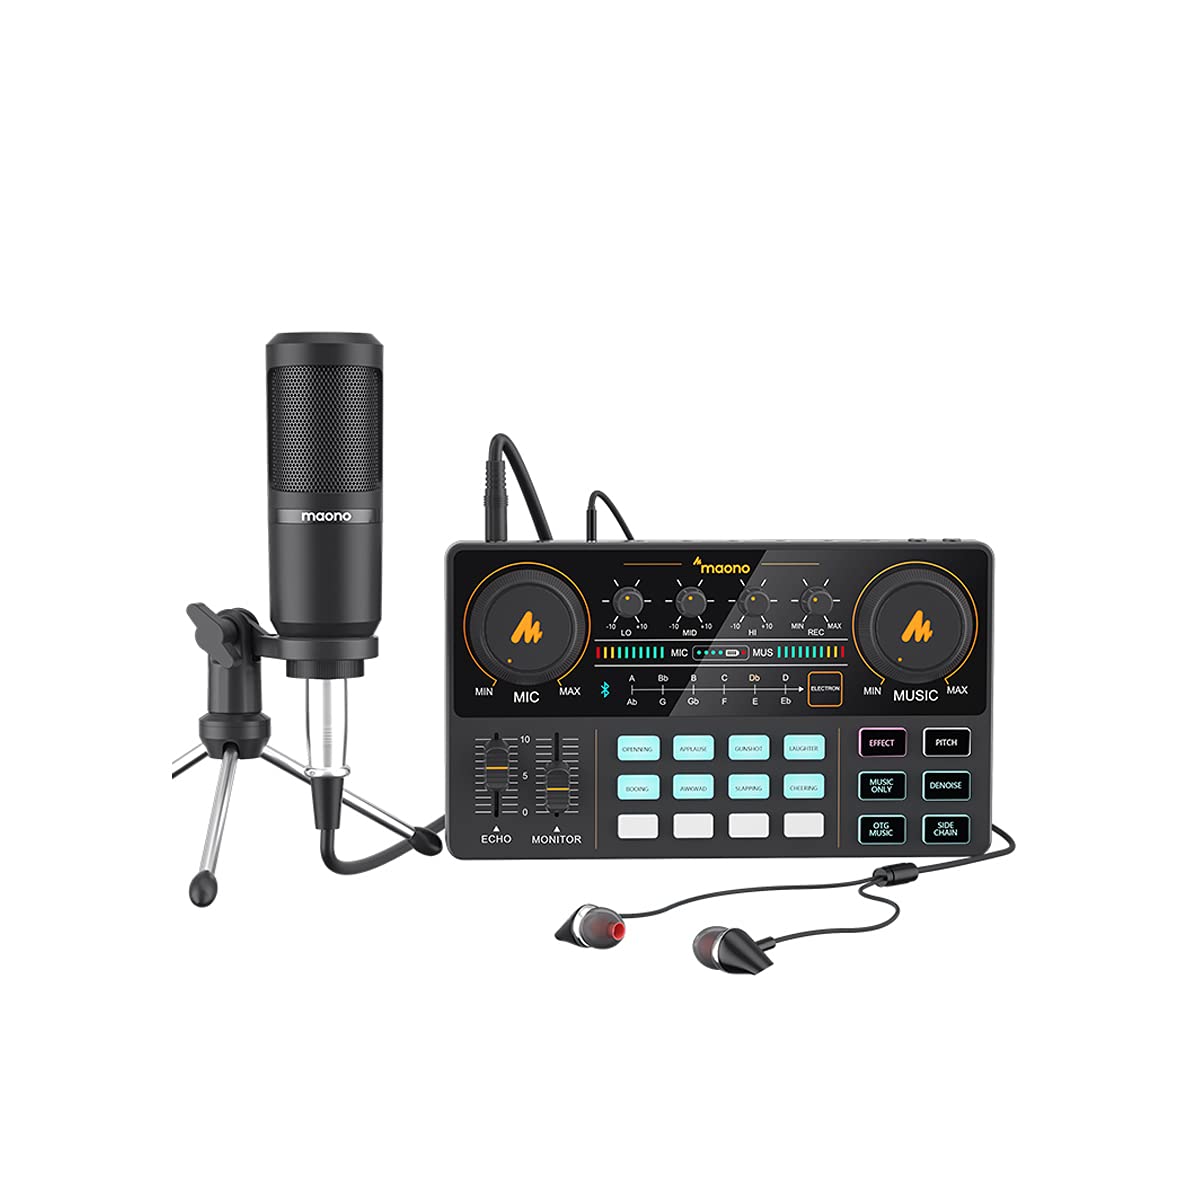 Maono AM200 - Maonocaster Lite mit mikrofon - All In One USB tragbar Podcaster package, AM200